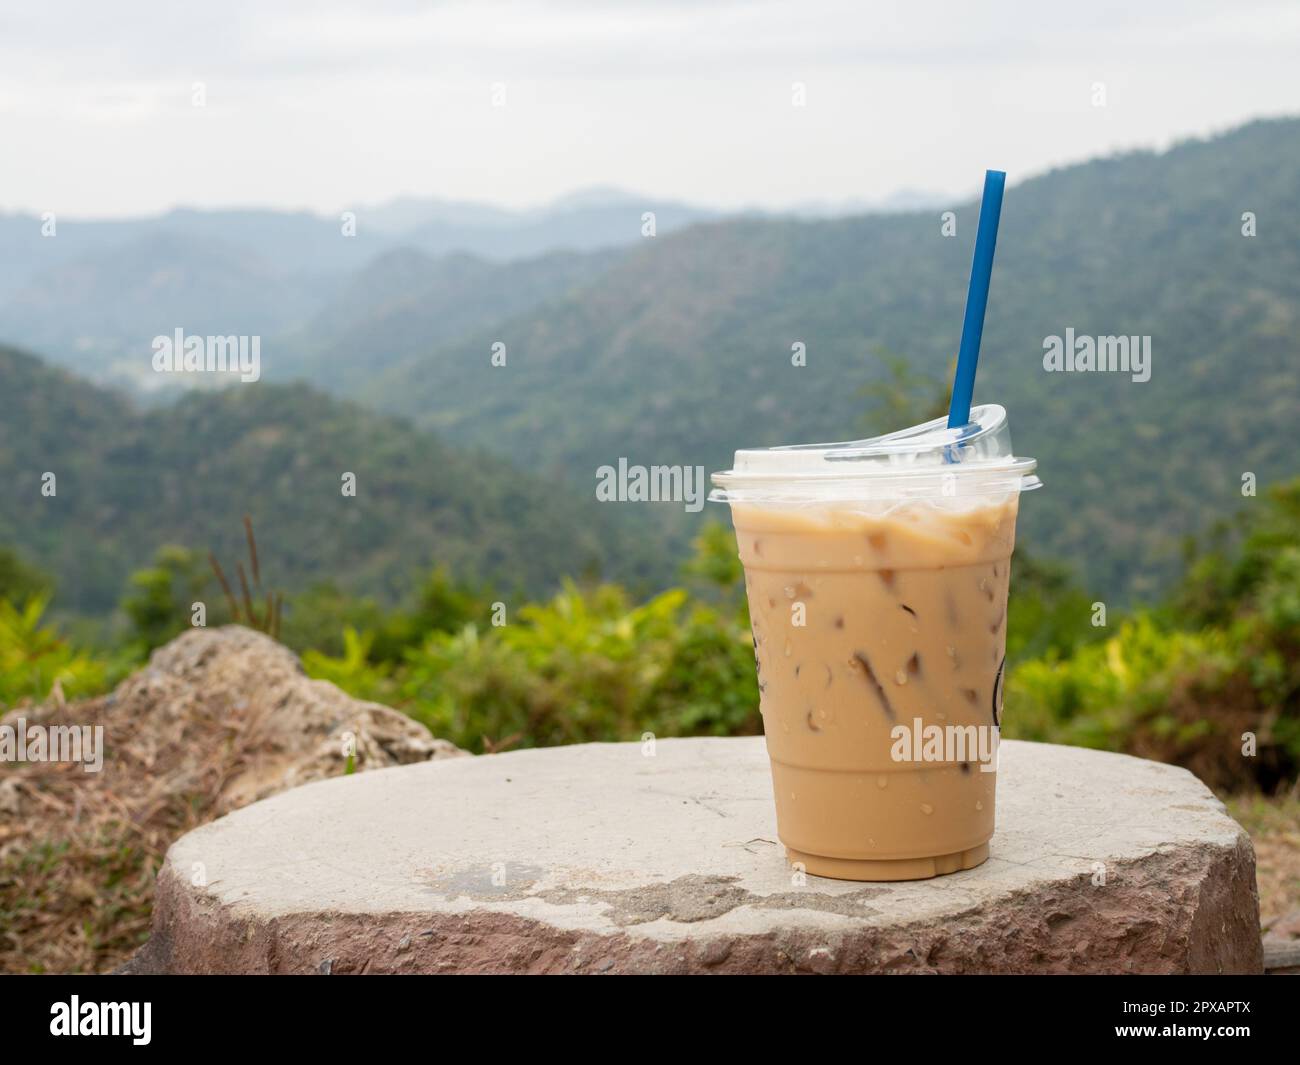 https://c8.alamy.com/comp/2PXAPTX/a-glass-of-iced-coffee-is-placed-on-a-rock-against-a-background-of-mountains-and-sky-2PXAPTX.jpg